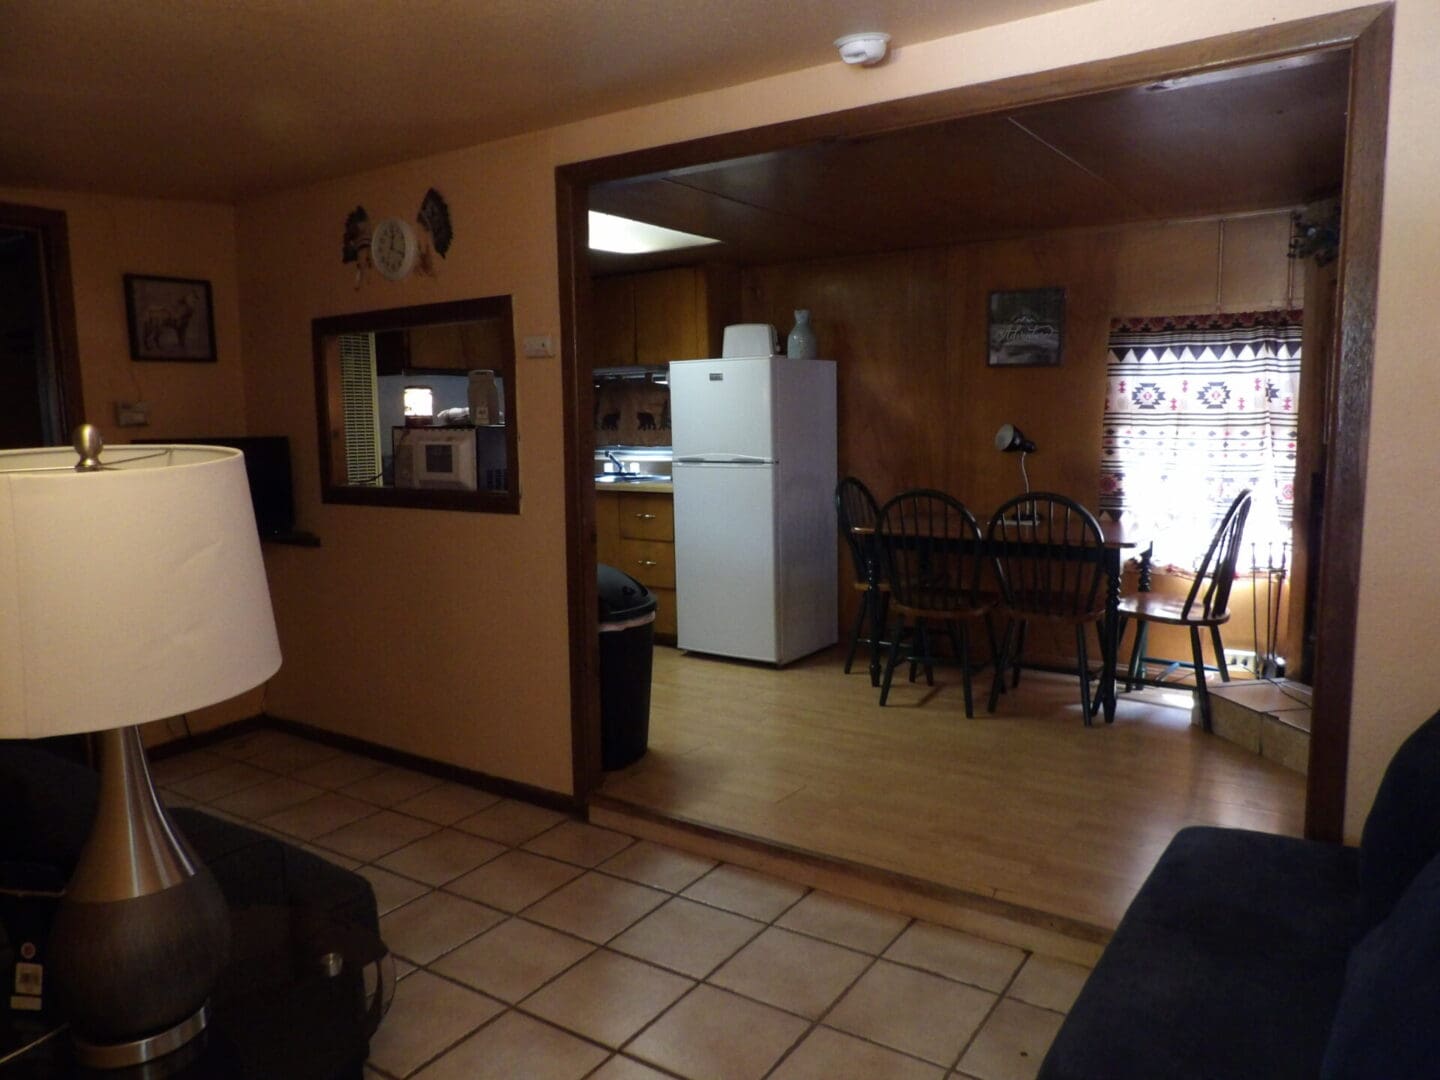 A kitchen with a refrigerator, microwave and table.